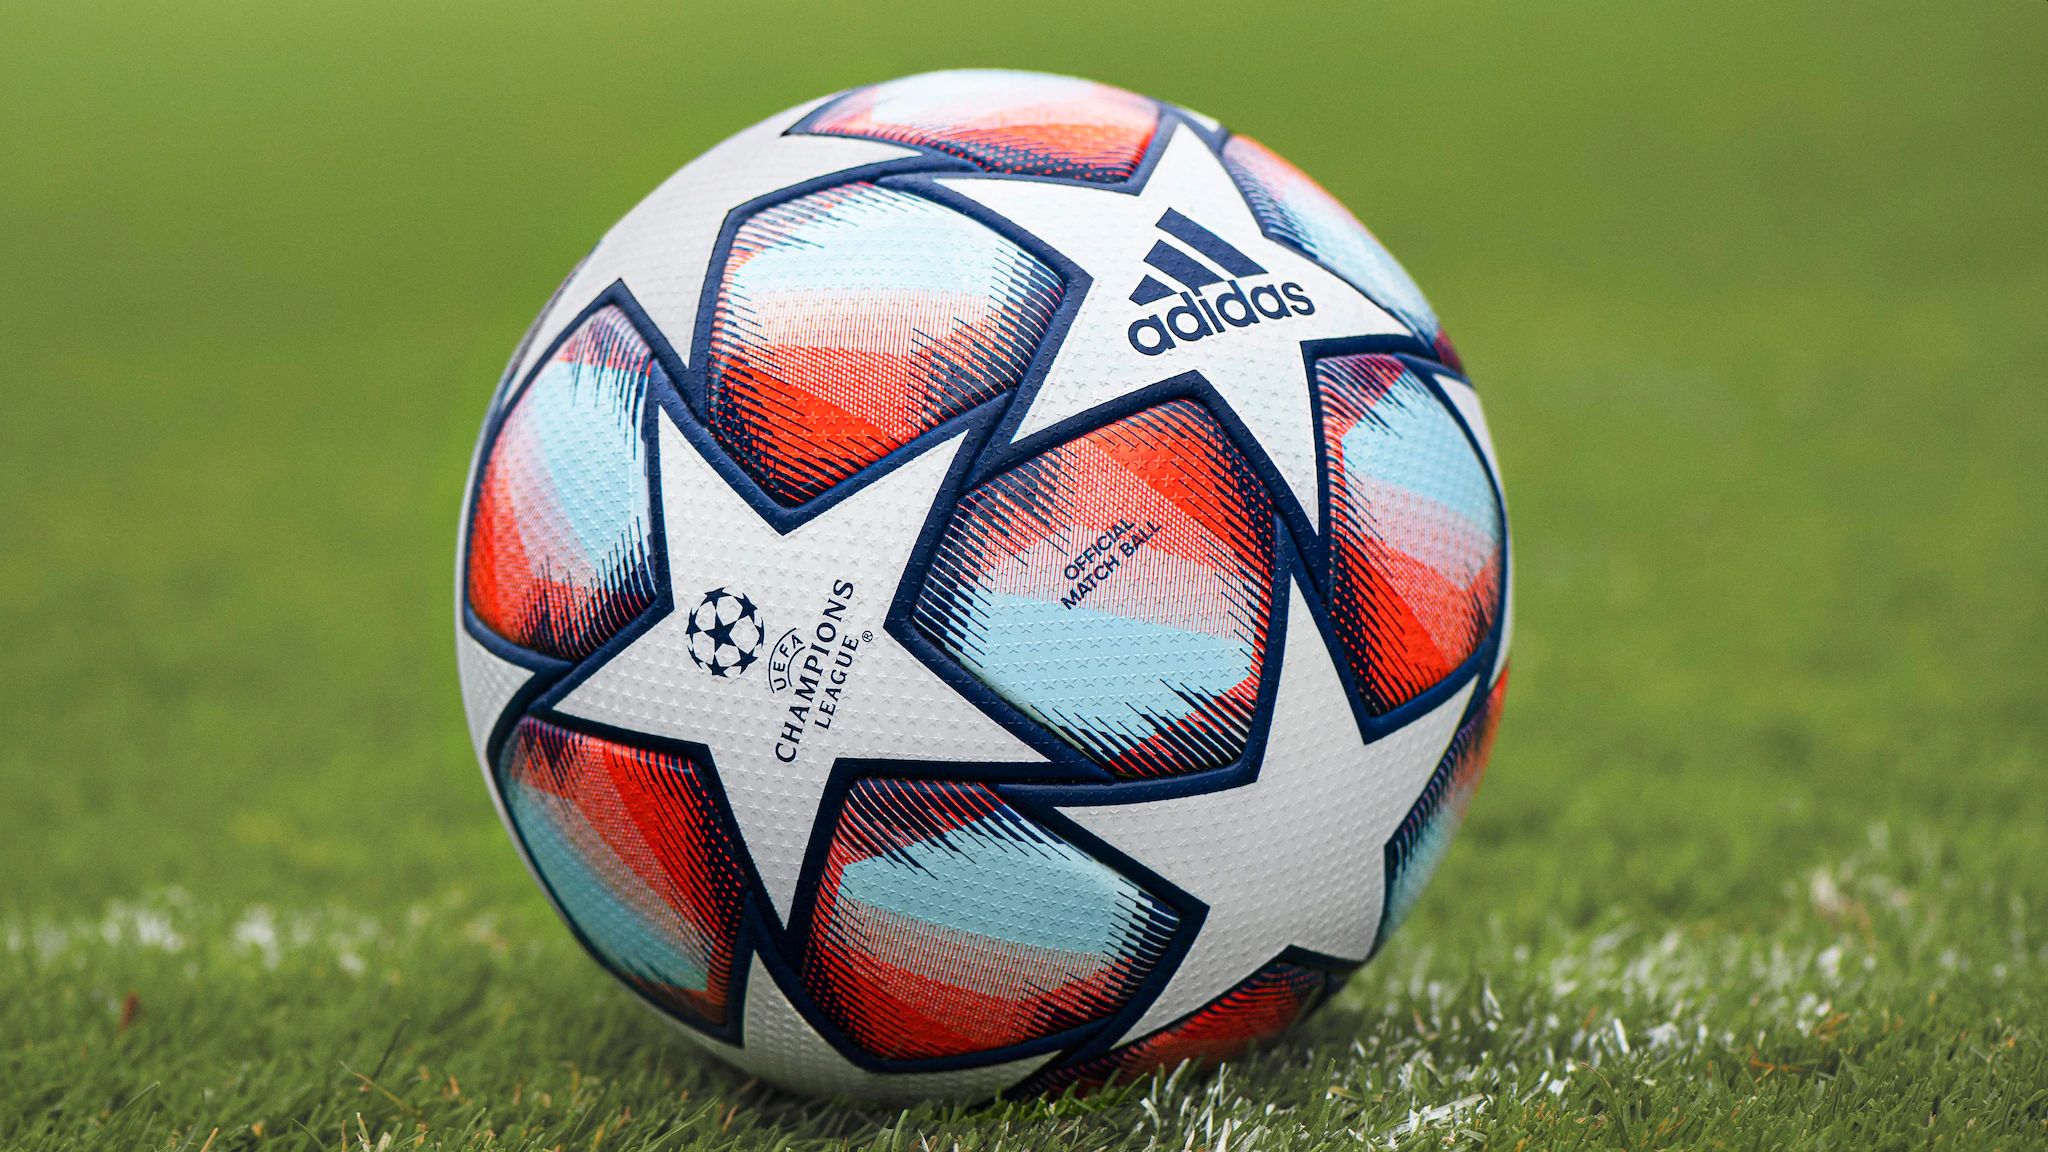 Match Ball for 2020/21 UEFA Champions League group stage presented by